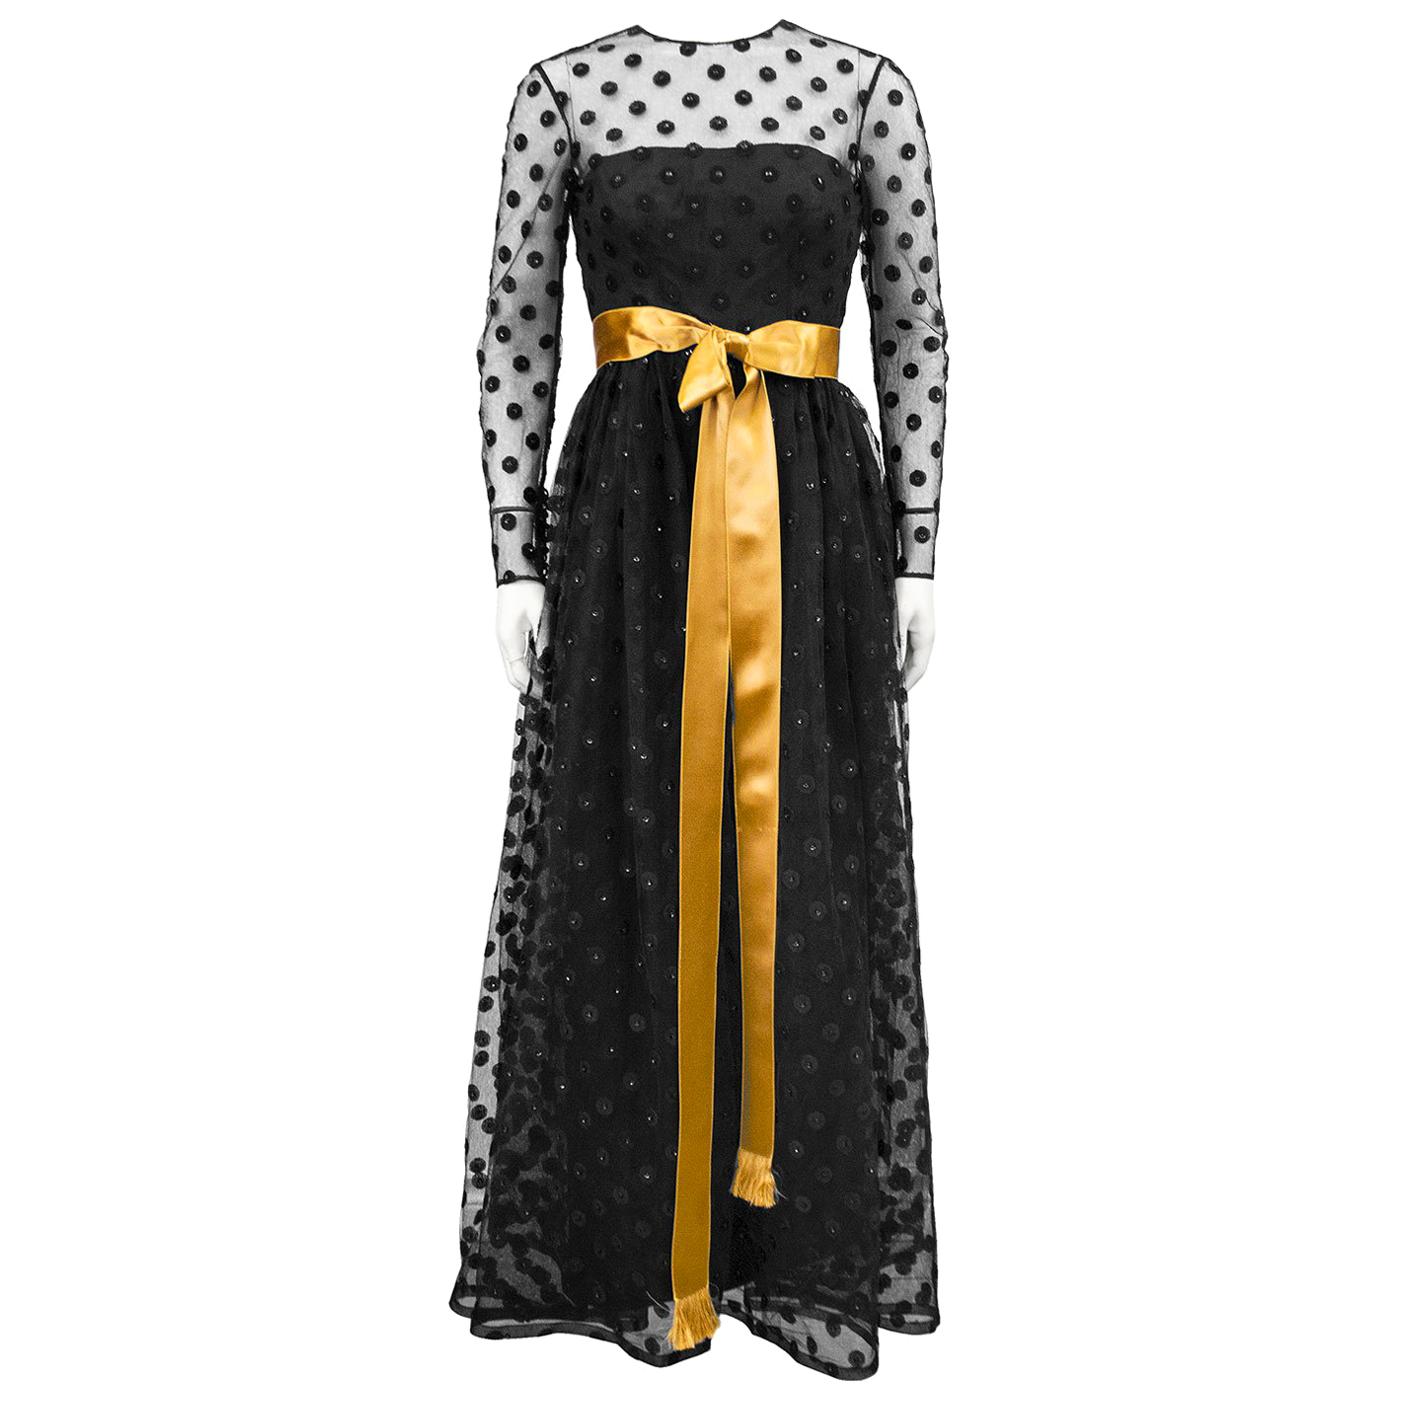 1960s Anonymous Black Long Sleeve Gown with Polka Dot Net Overlay and Gold Sash  For Sale